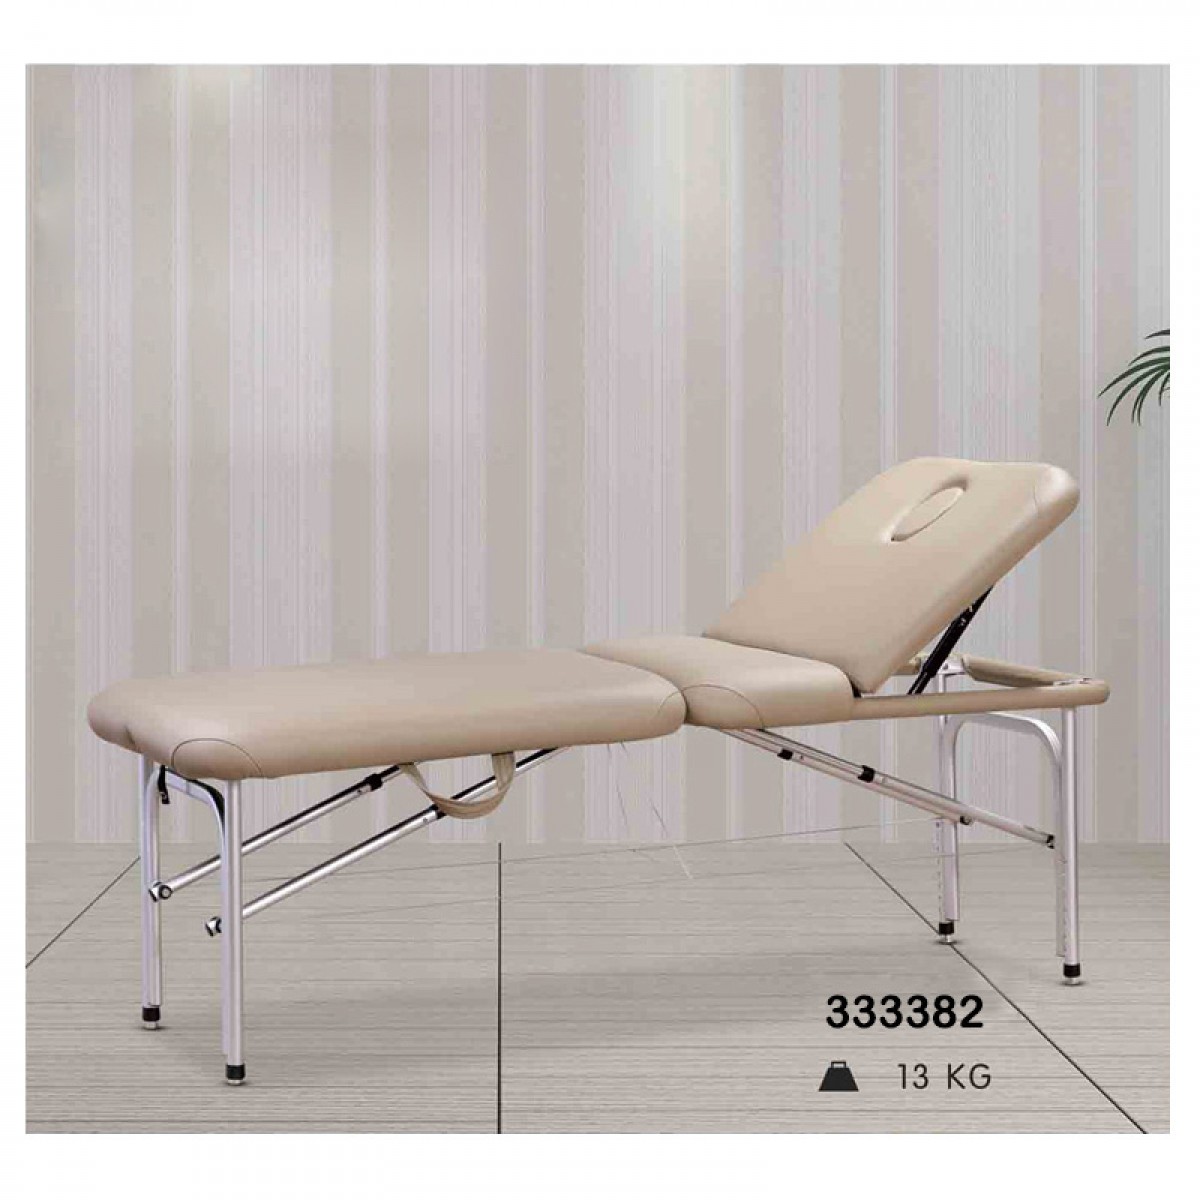 Deluxe Lightweight Portable Folding Massage Table Bed Beauty Salon Therapy Couch With Face Hole